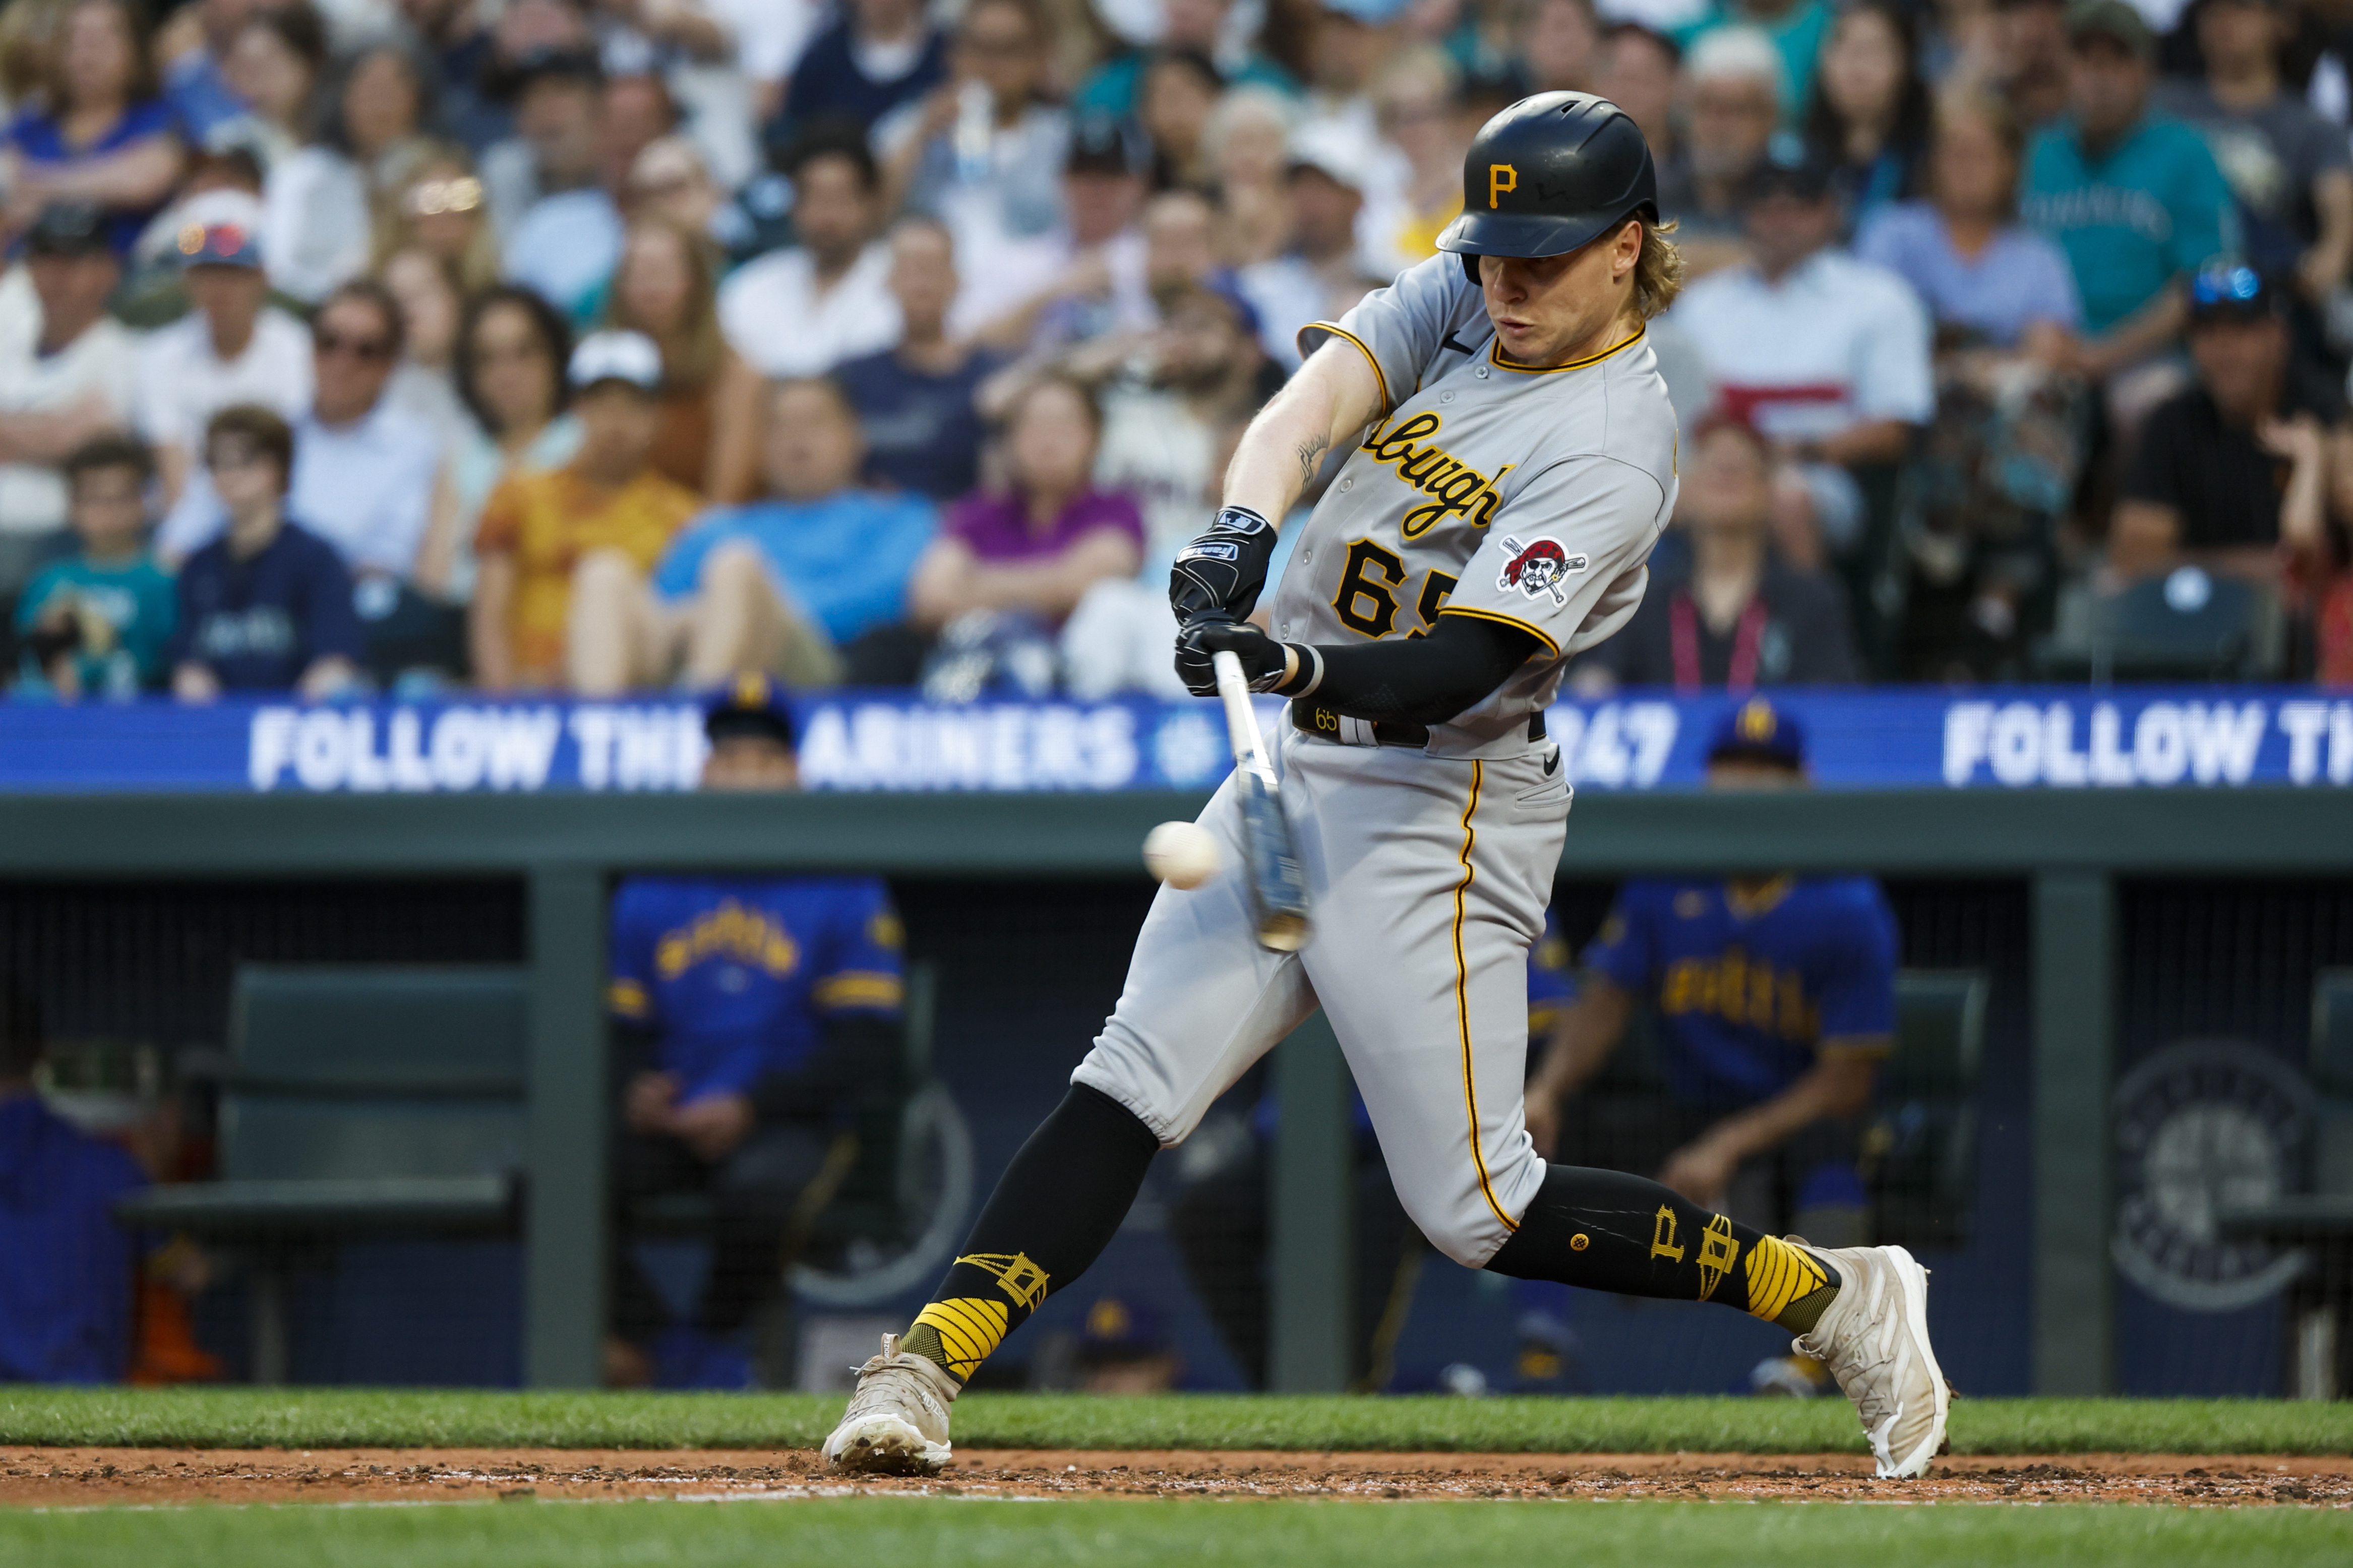 Pirates play home-run derby in blasting Mariners